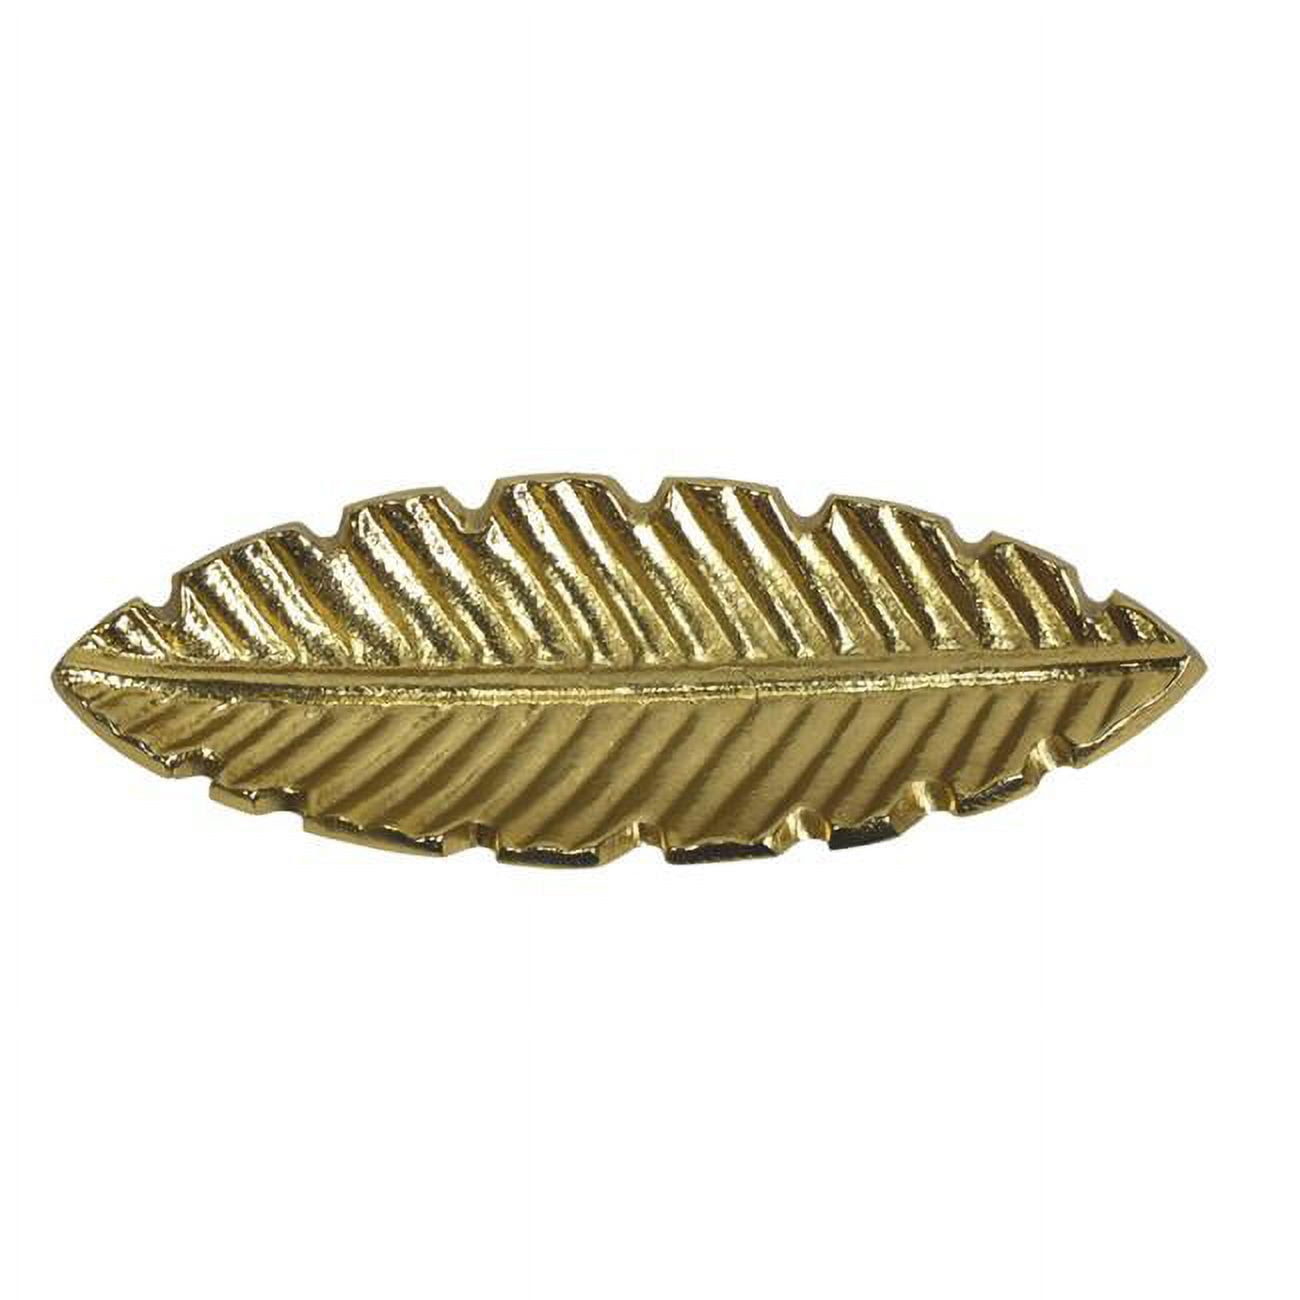 Picture of BBH Homes UBBBVK040AB2020SC2HS 7.28 x 2.36 x 0.78 in. Handmade Gold Coated Decorative Aluminum Tray